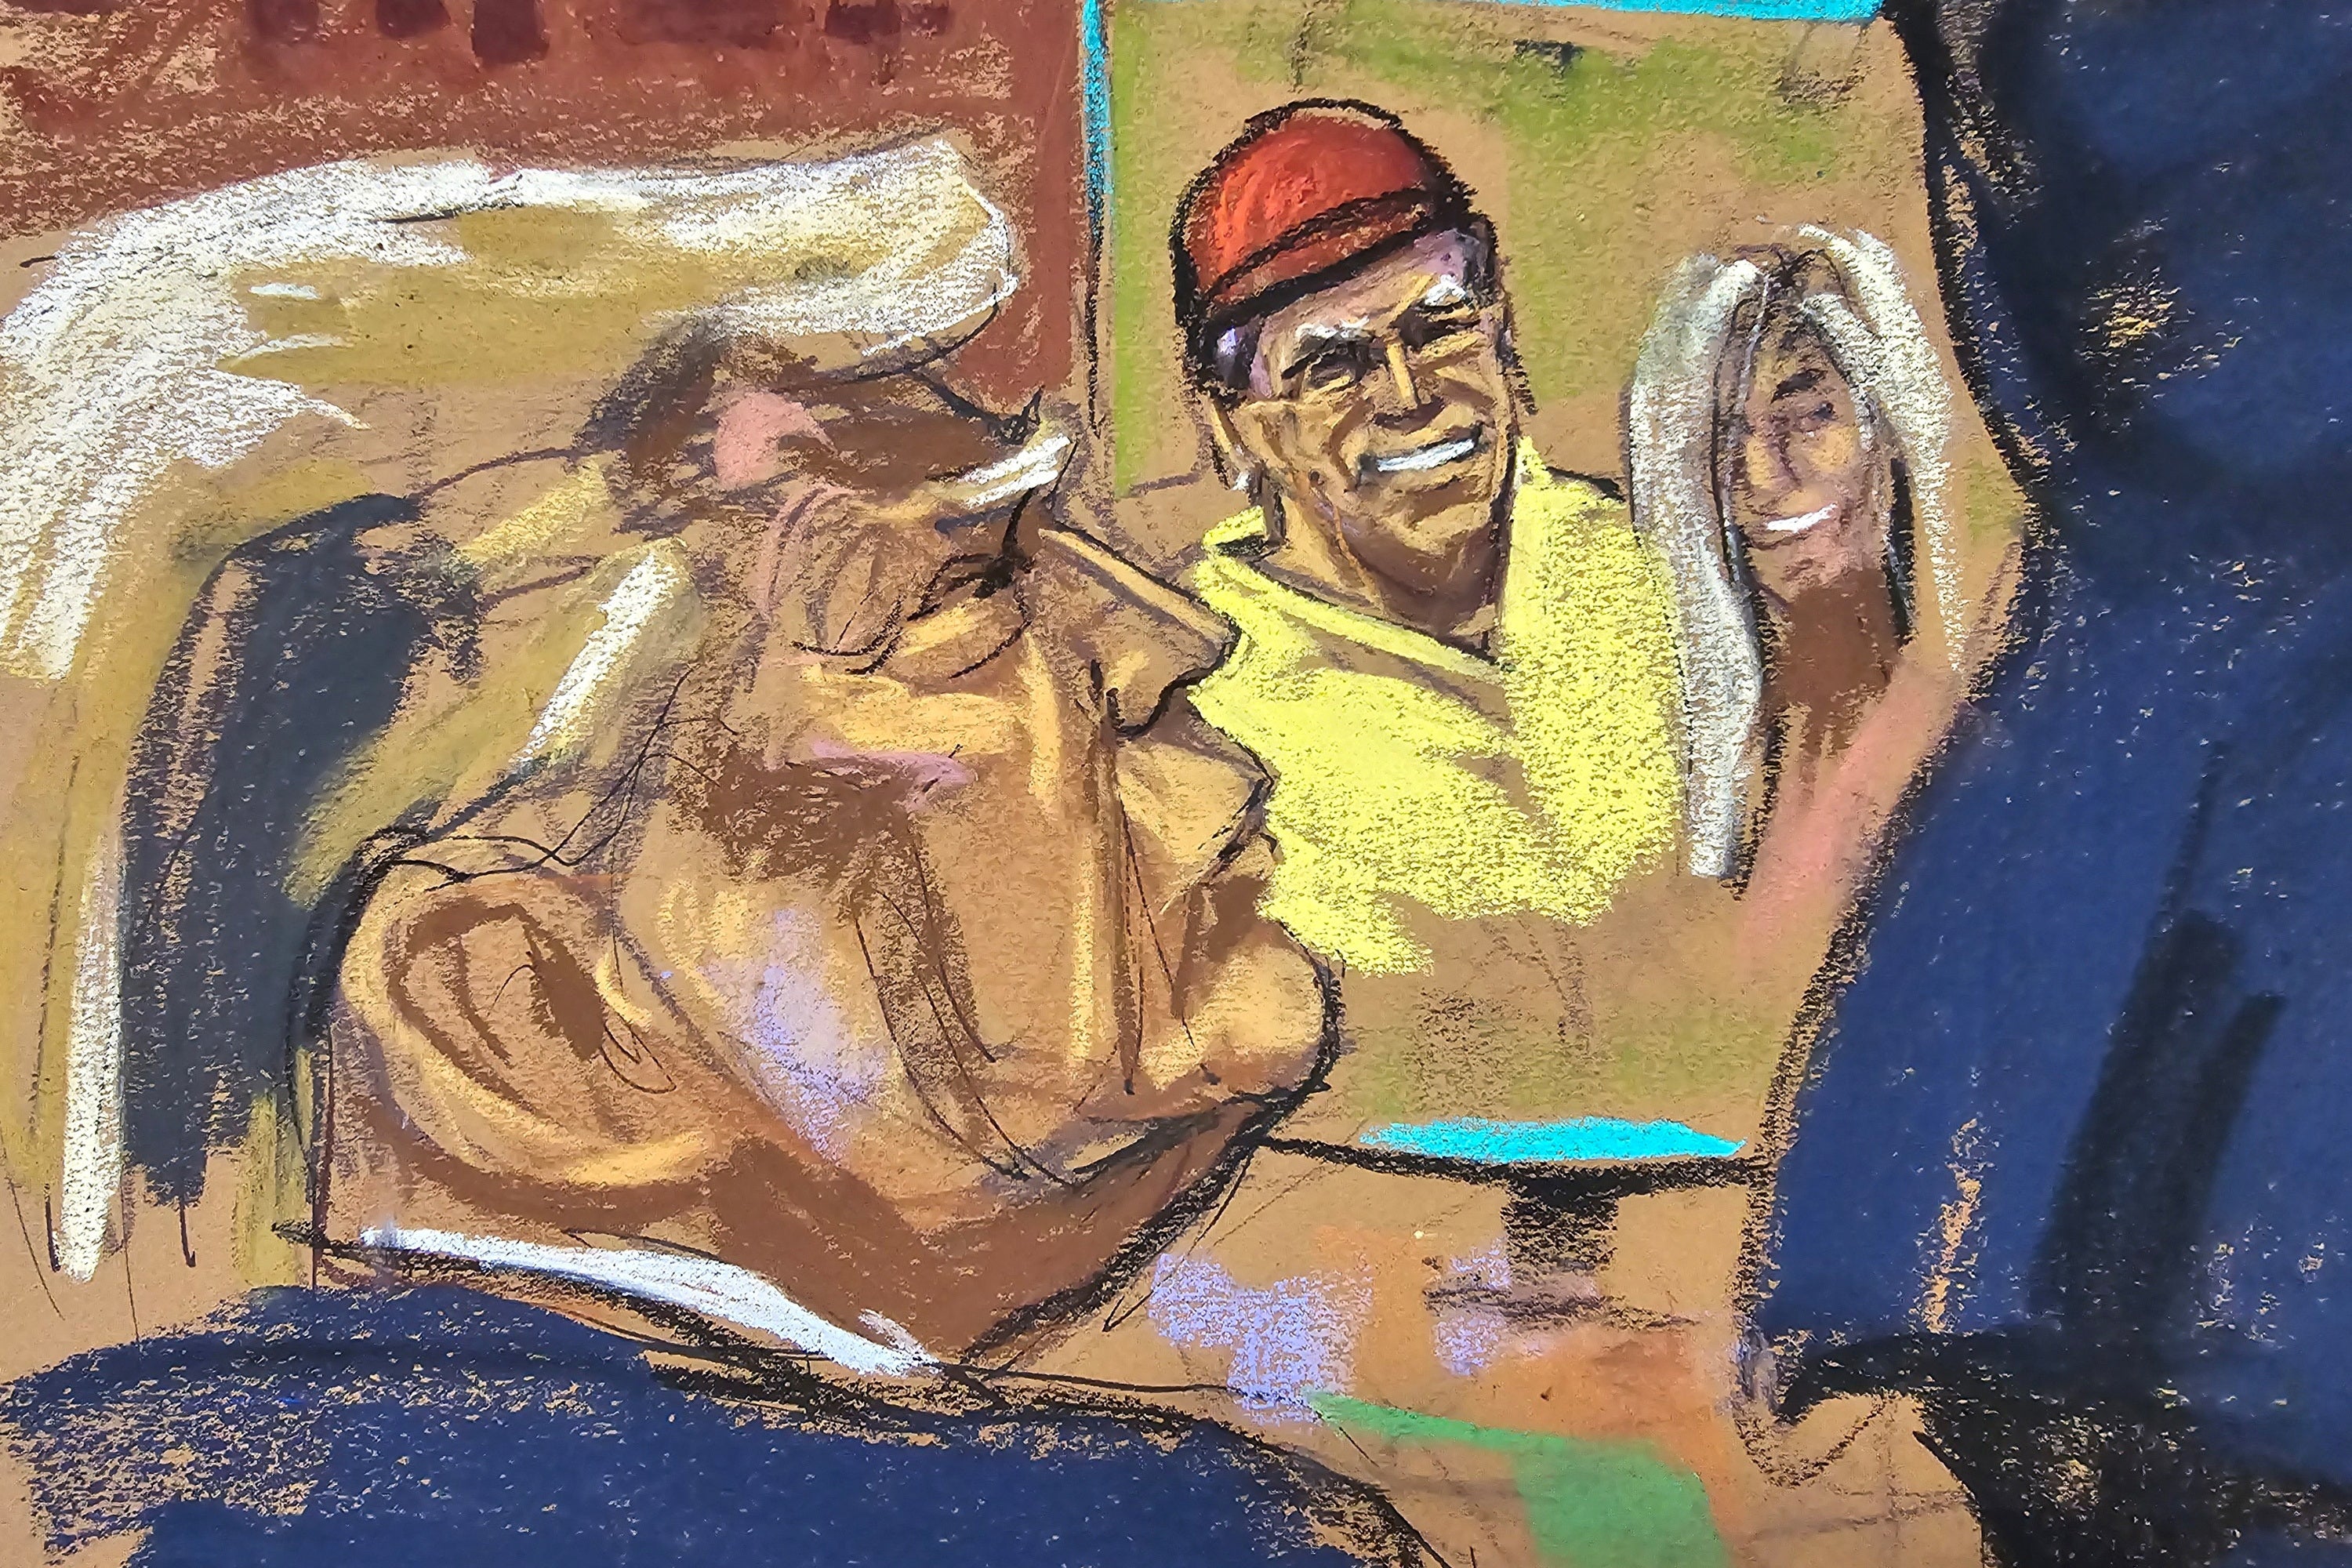 A courtroom sketch depicts Donald Trump looking at a 2006 photo of himself with Stormy Daniels at a golf tournament, taken the same day he allegedly had sex with her.